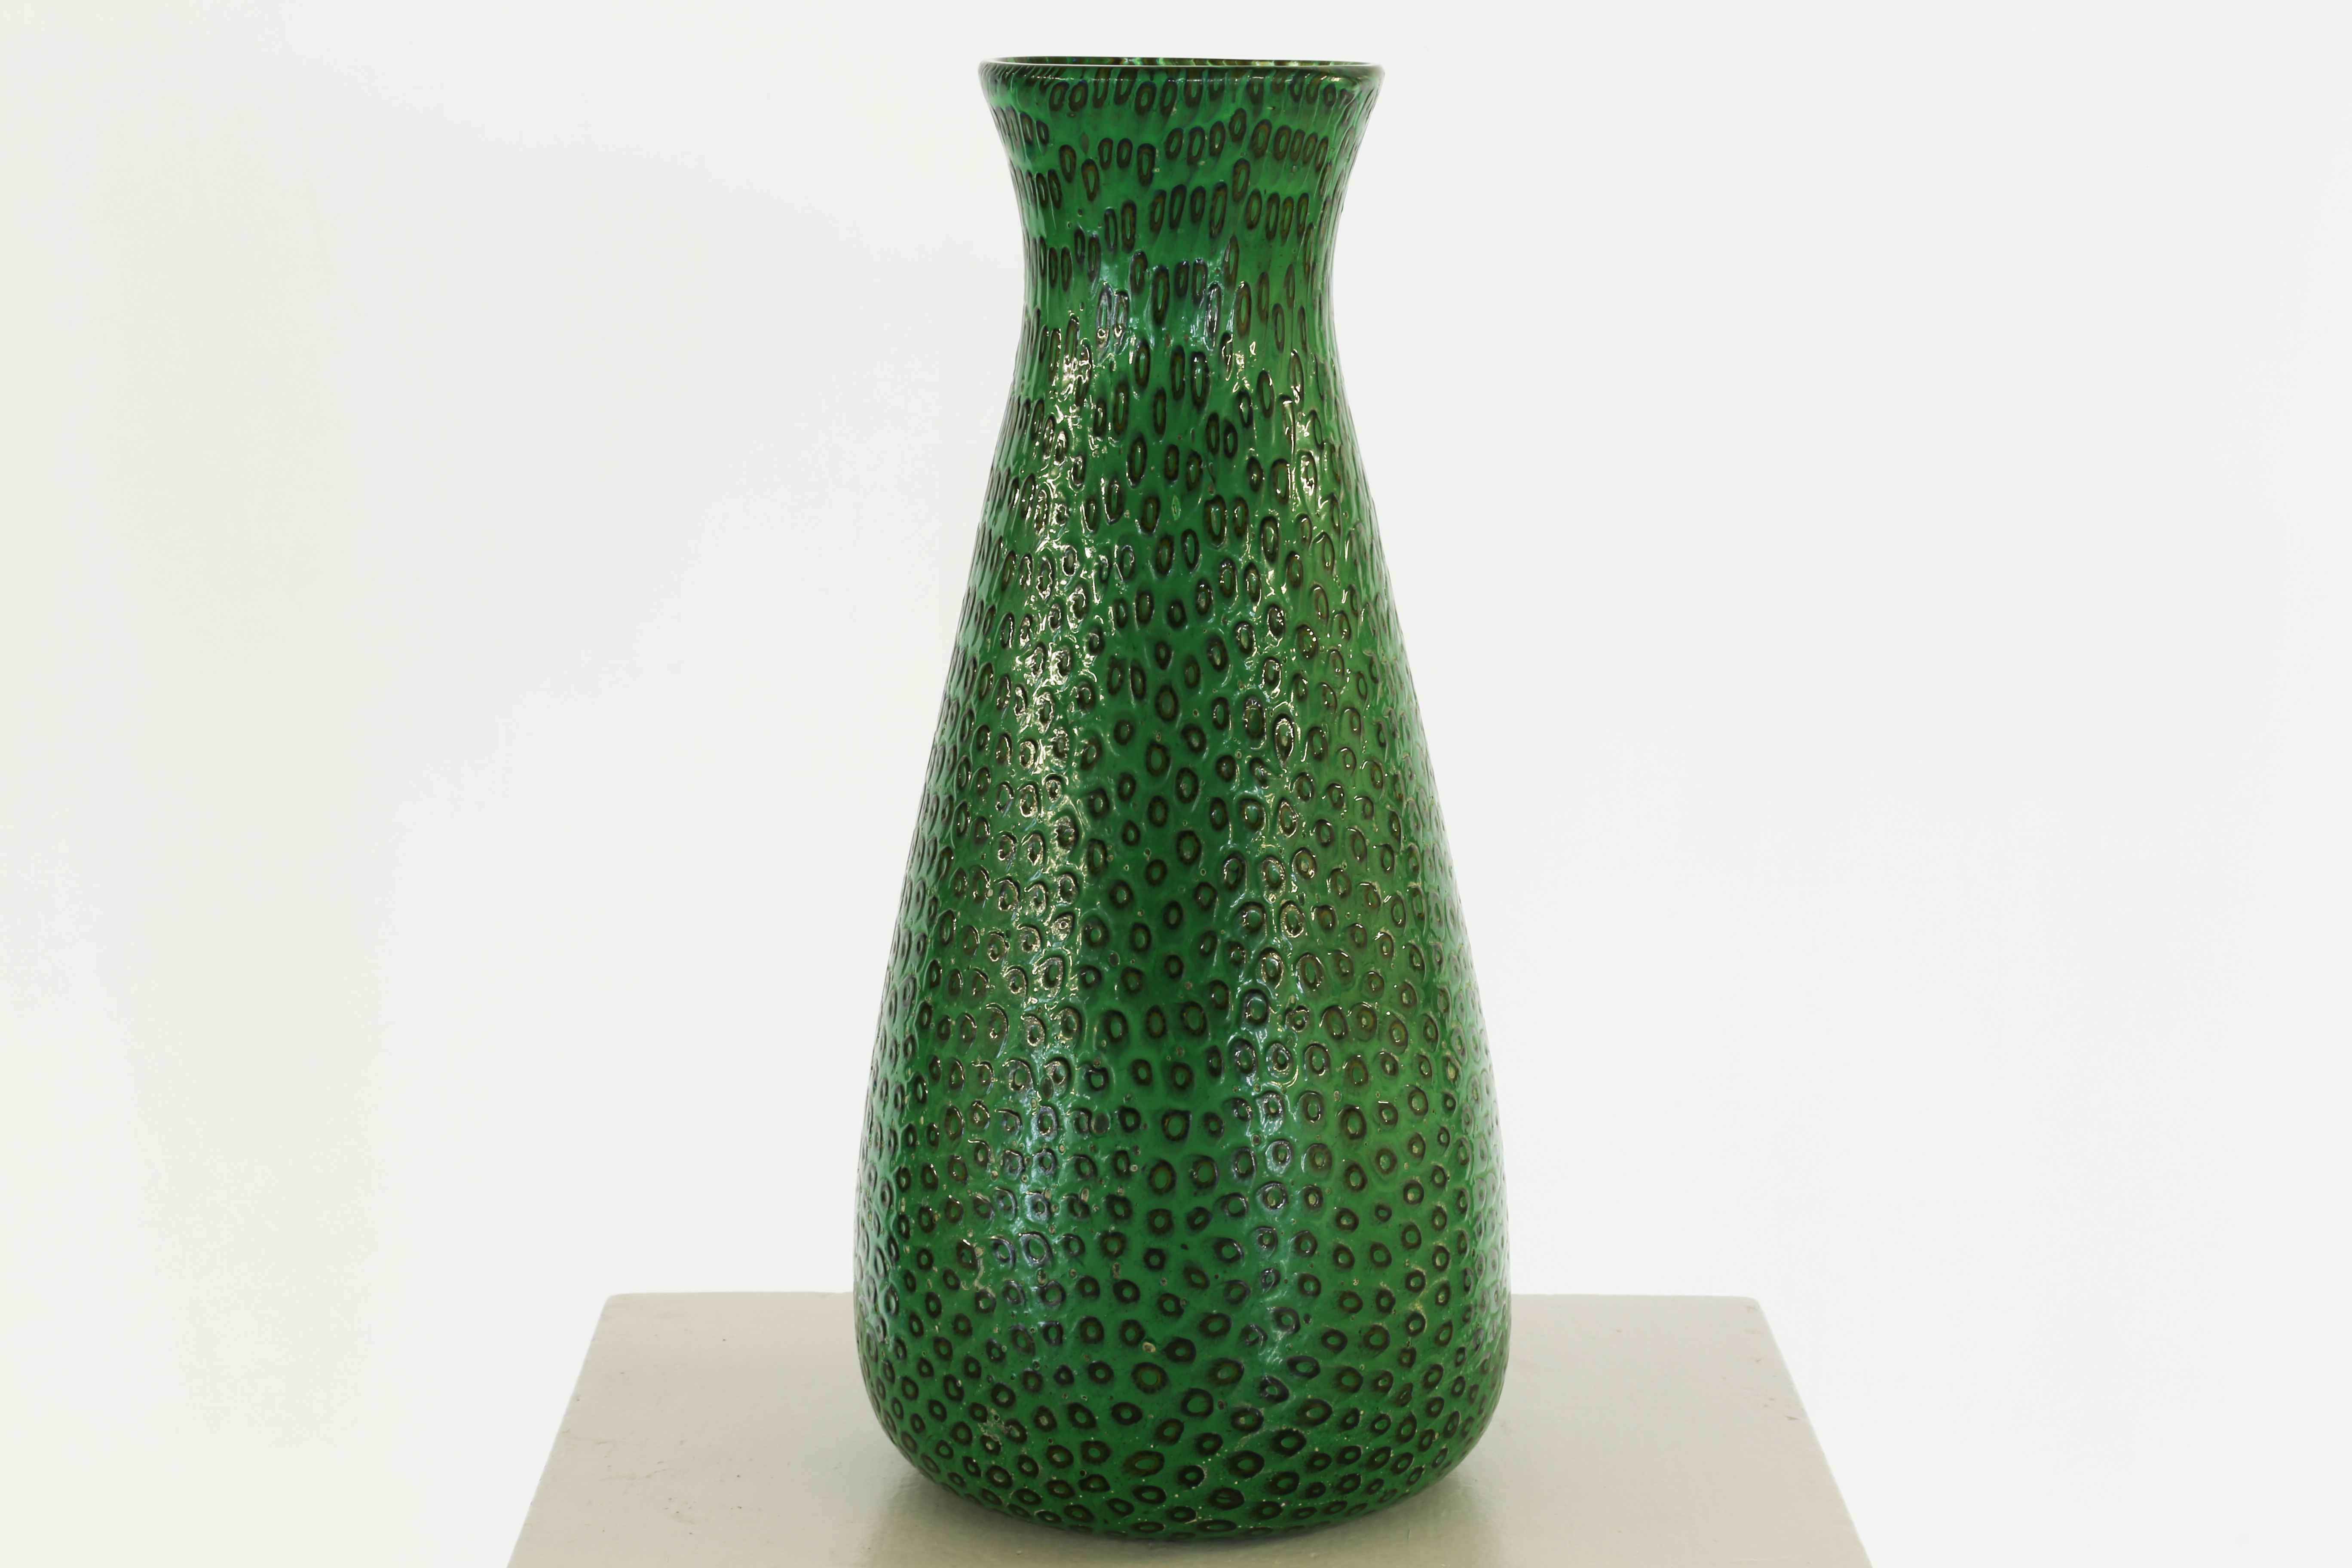 TOSO AURELIANO
Large glass vase Murrine embossed on the surface in molten green glass.
.

20,00 x